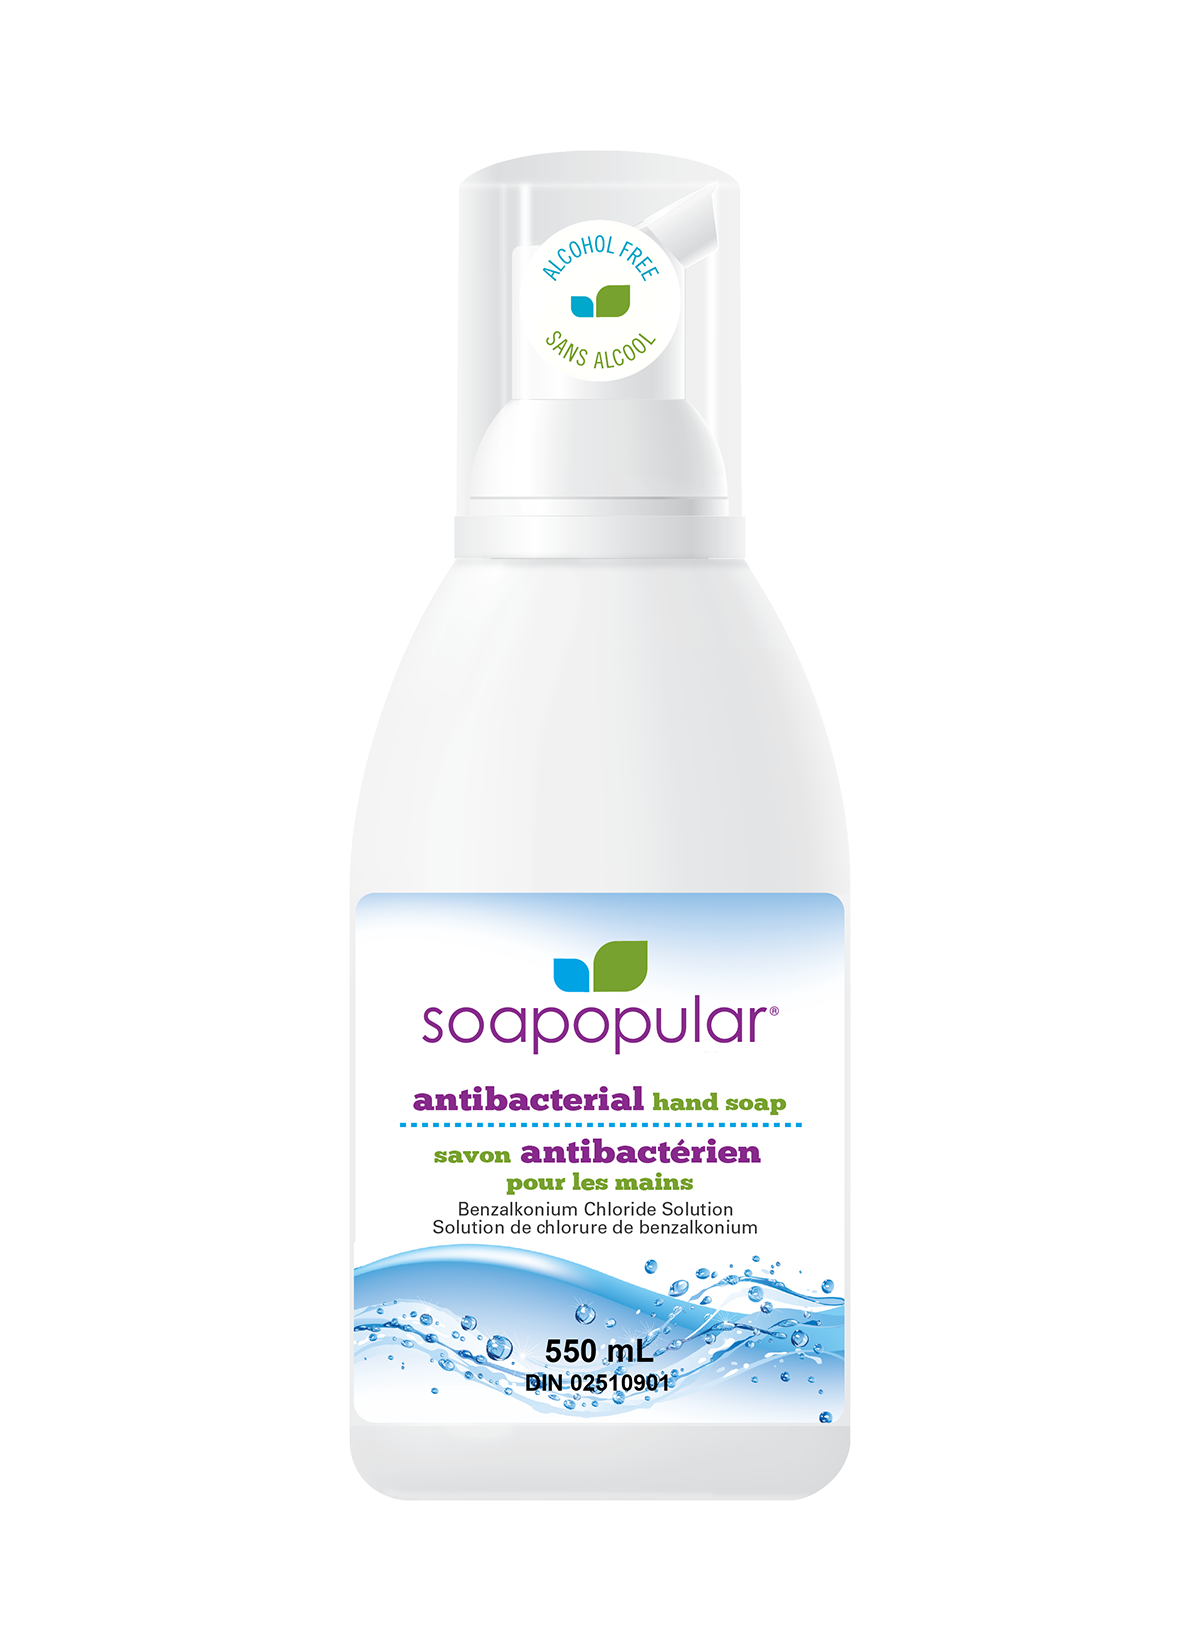 Soapopular triclosan free hand soap provides a rich foaming formula with antibacterial properties.